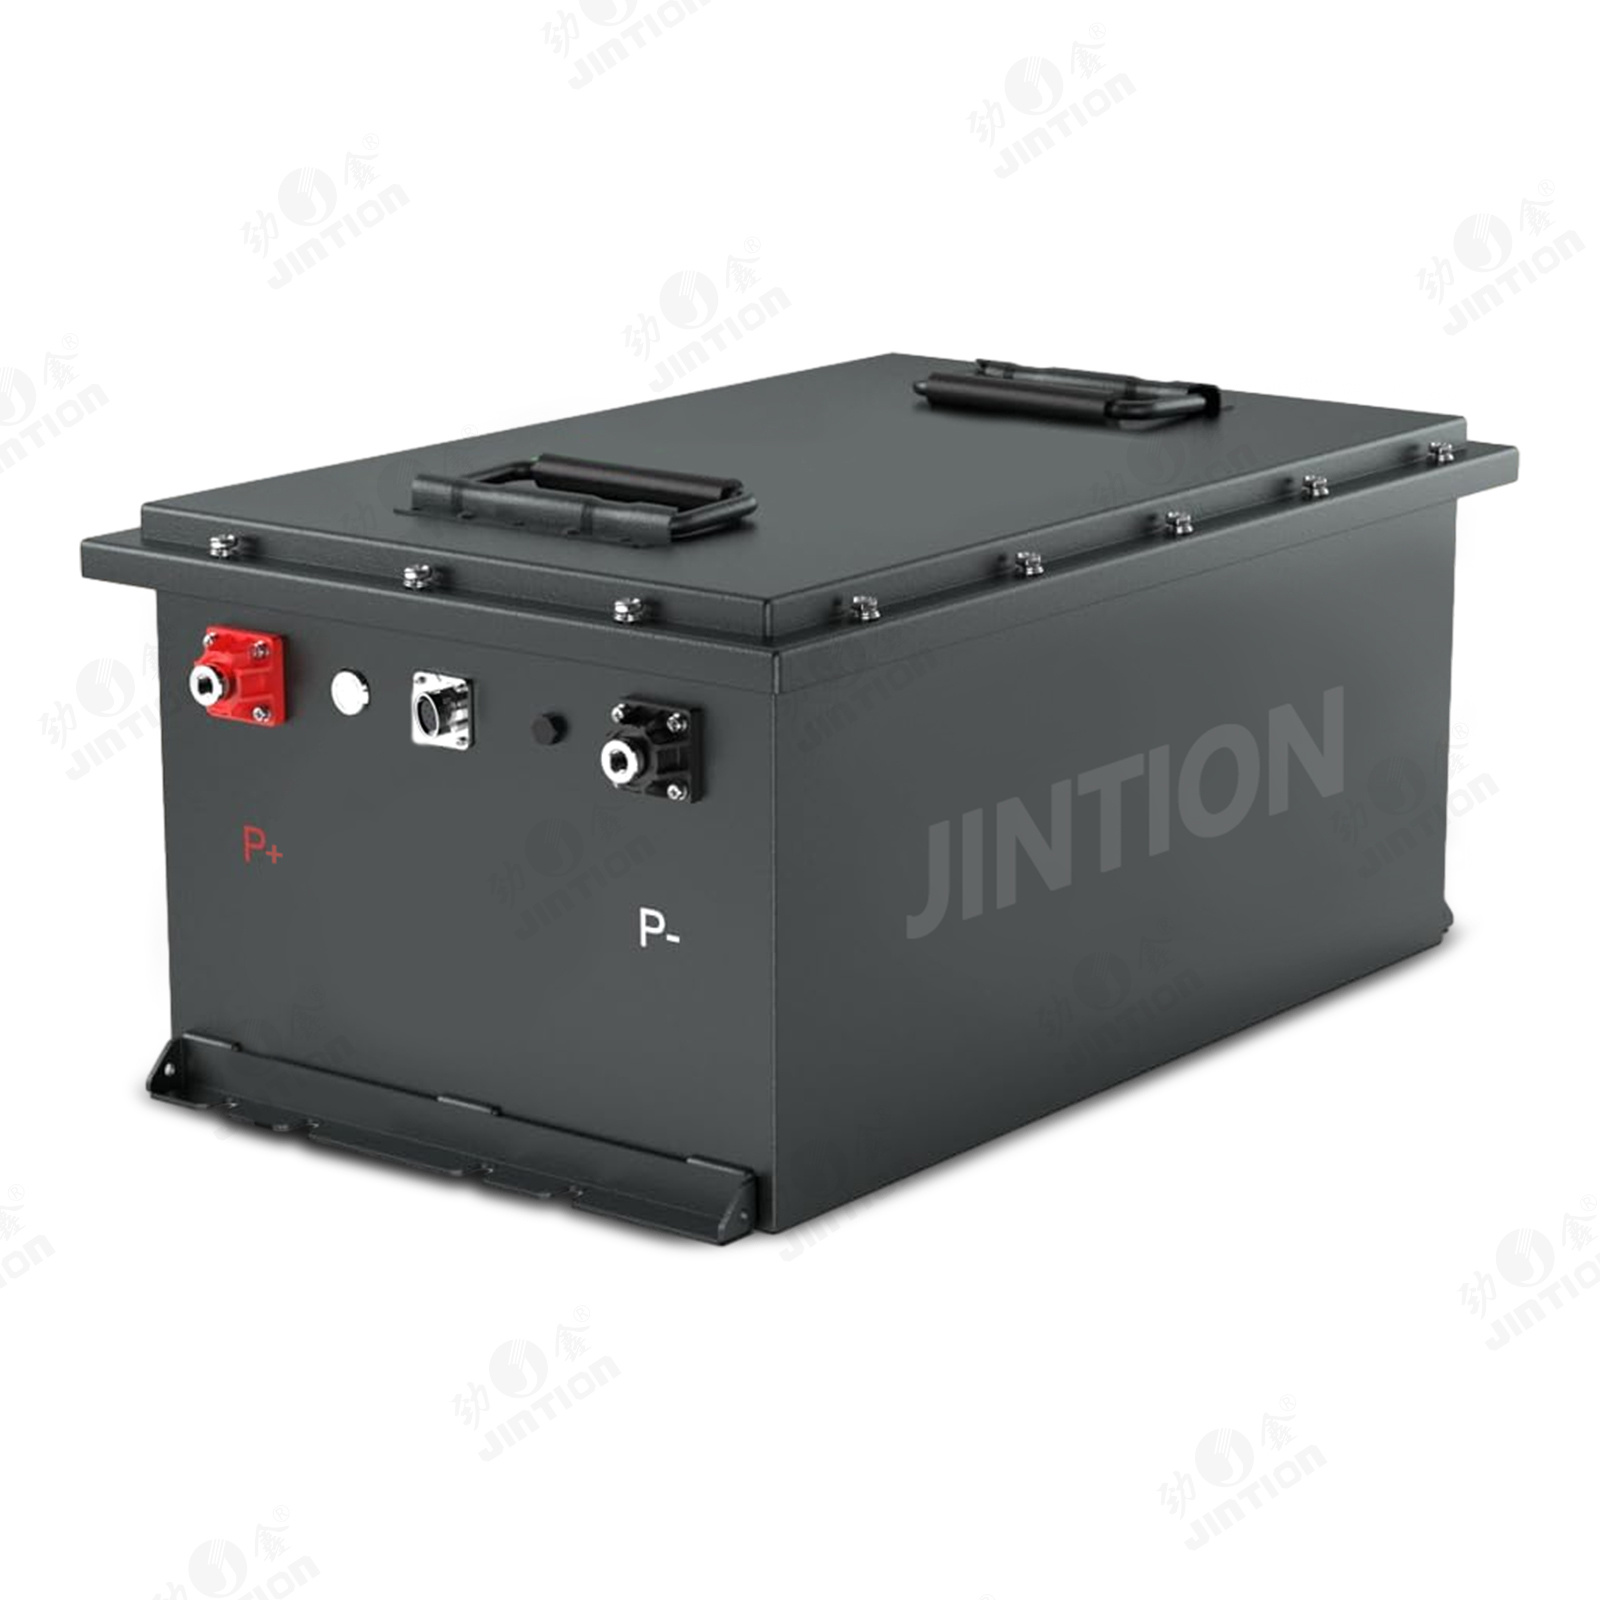 JINTION 48v lifepo4 battery 105ah lifepo4 battery akku with Touch Monitor & Mobile APP 4000+ Cycles Max 10.24kW Power Output